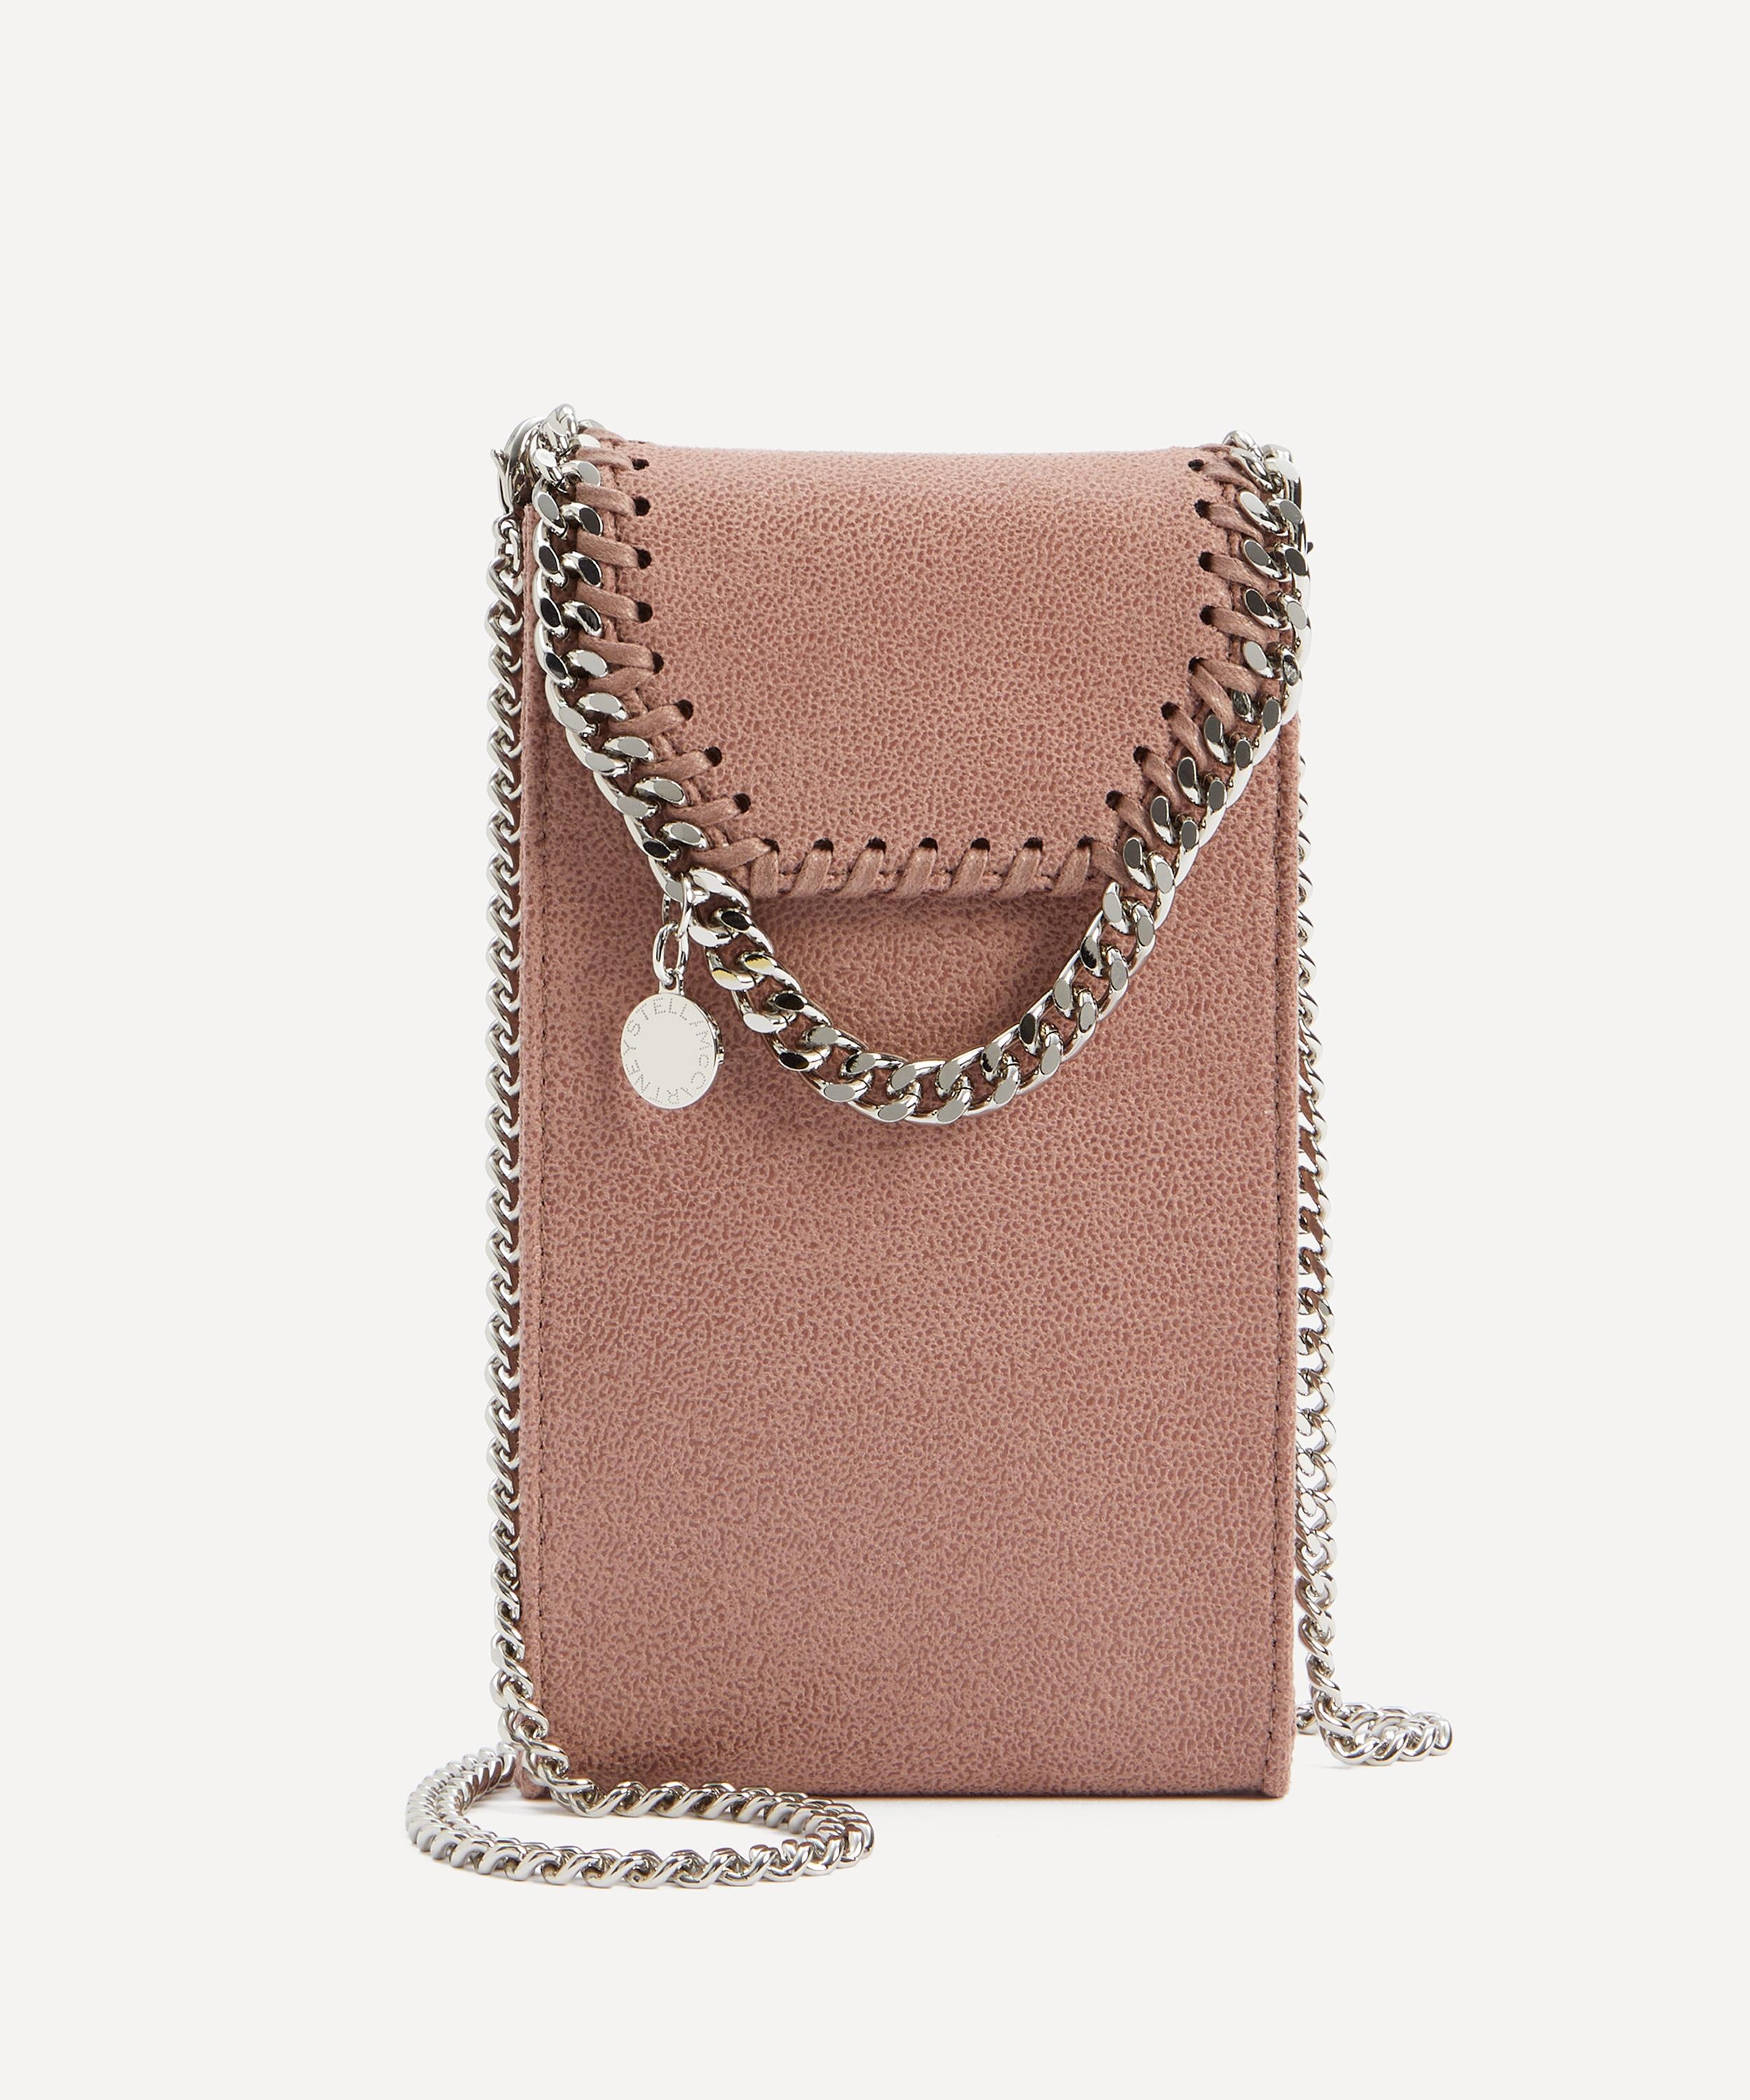 Falabella Chain-Link Phone Pouch - 1